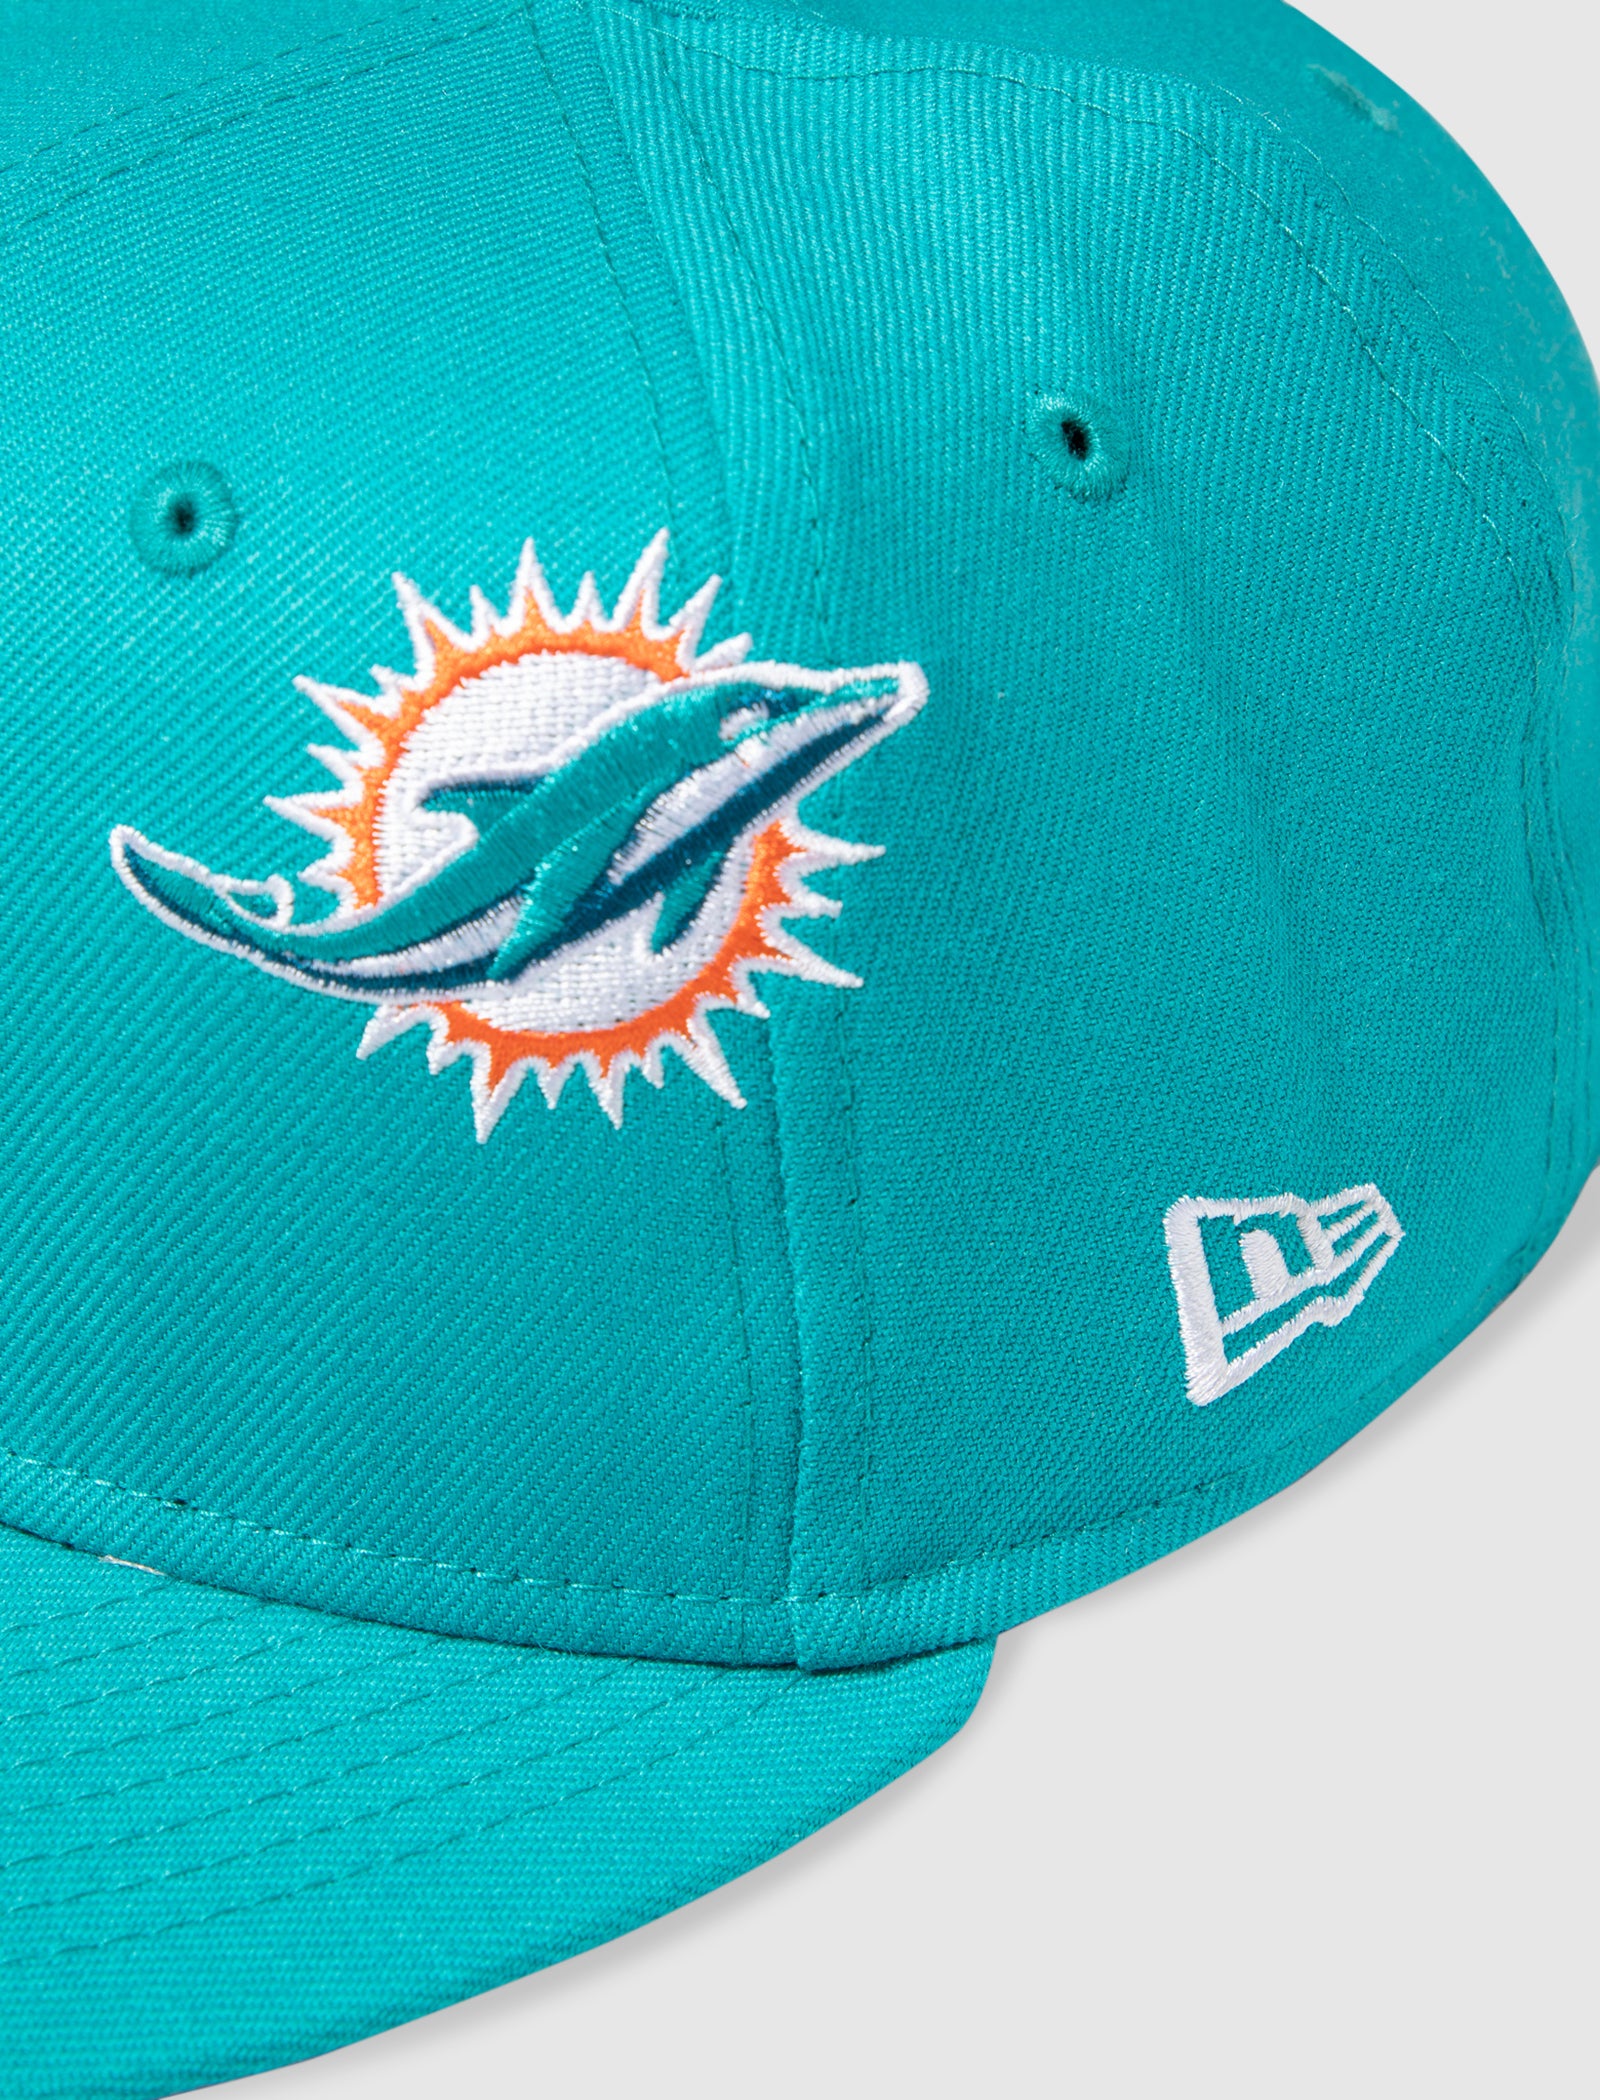 JUST DON MIAMI DOLPHINS HAT